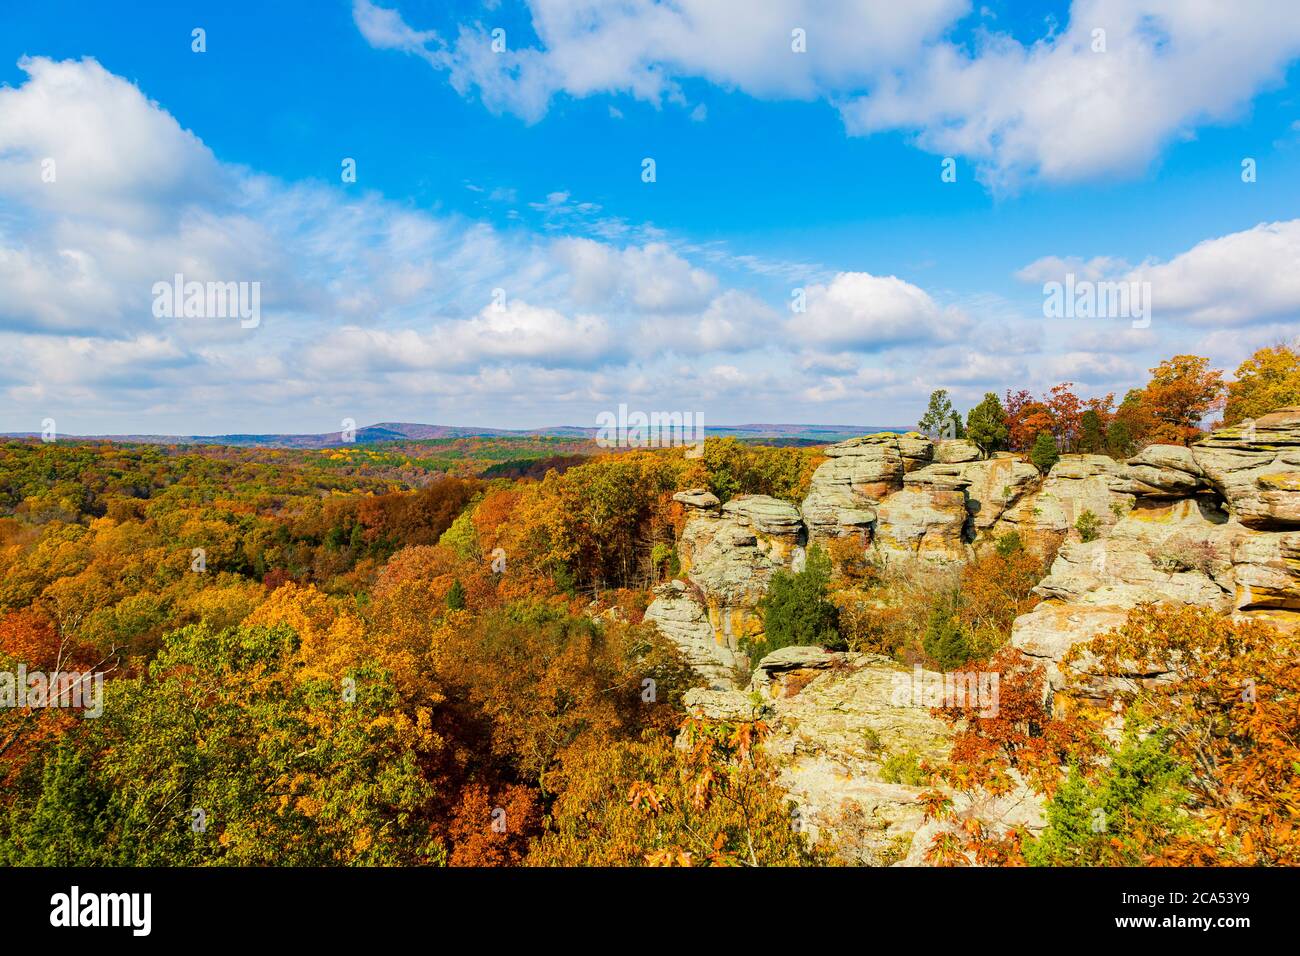 View of Camel Rock and forest, Garden of the Gods Recreation Area, Shawnee National Forest, Illinois, USA Stock Photo